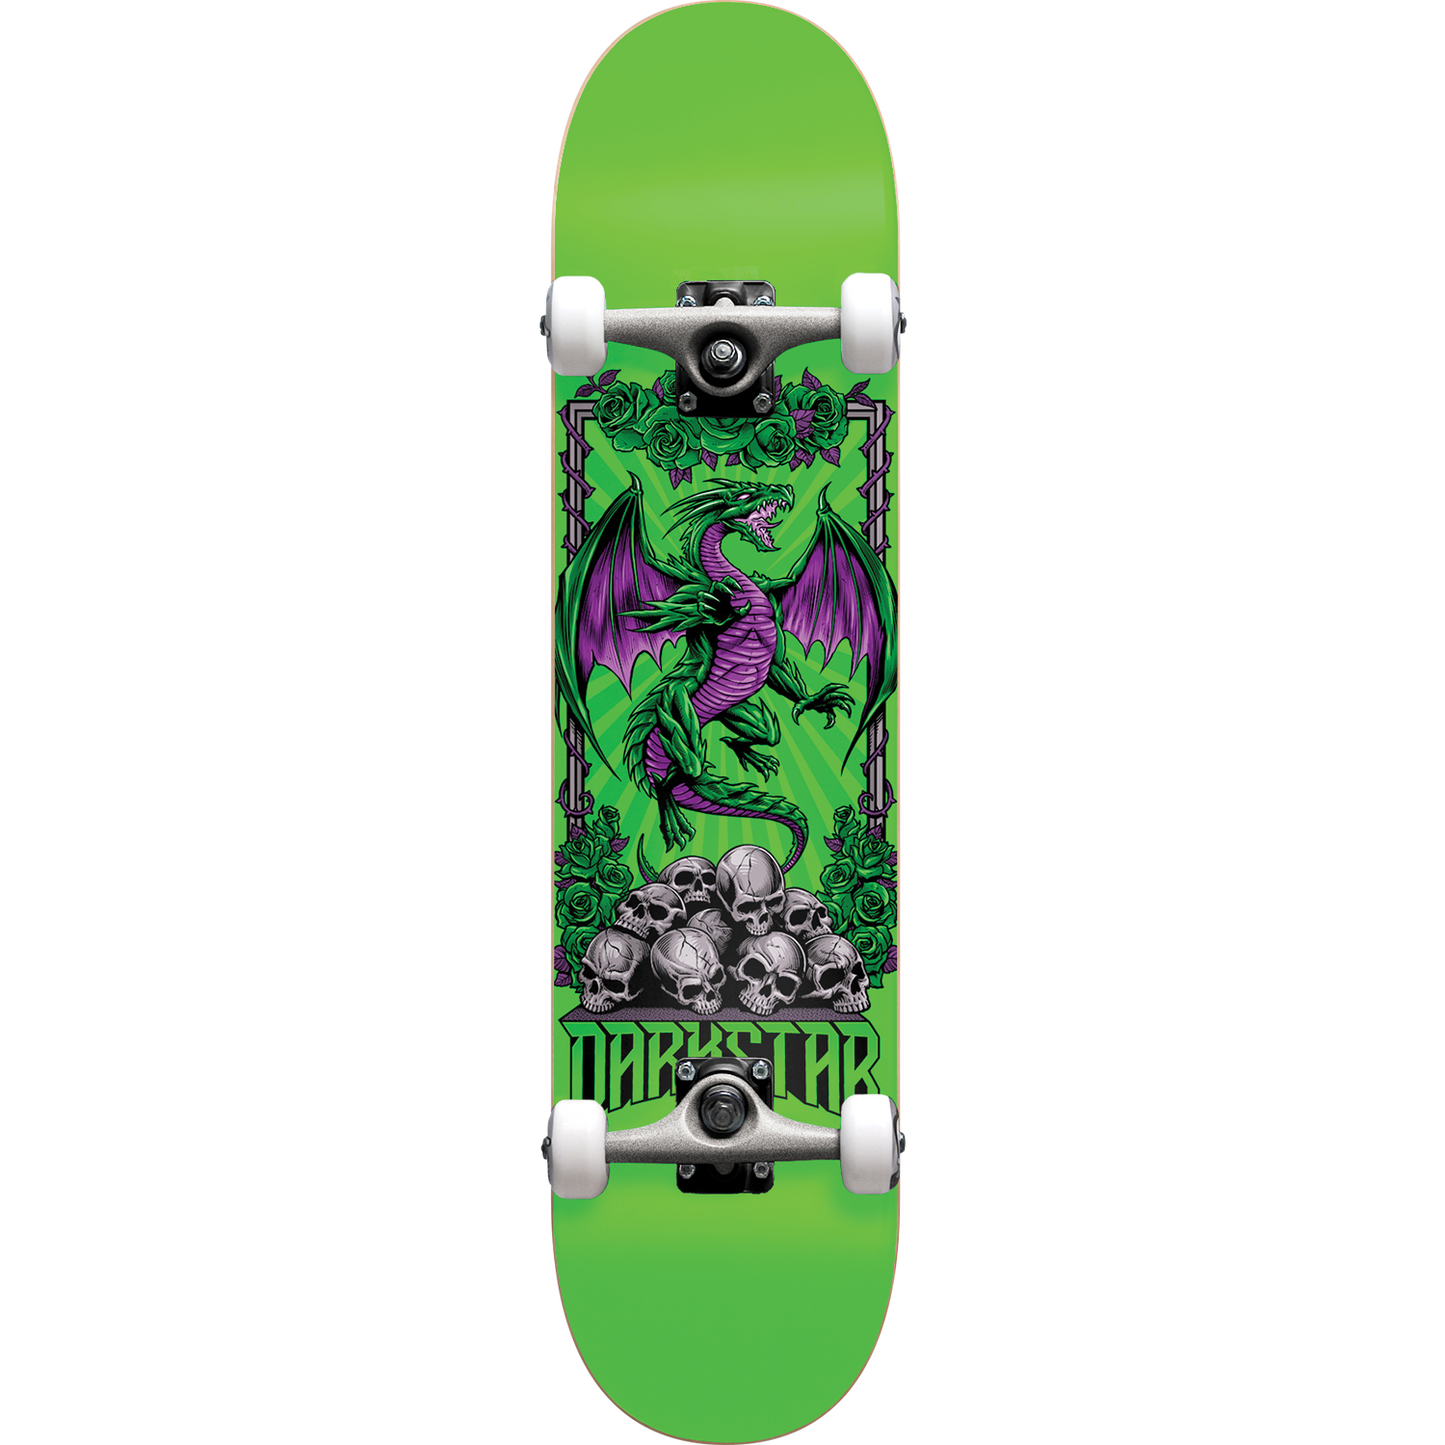 Darkstar Complete Skateboard Variation - Ready To Ride out of the Box!